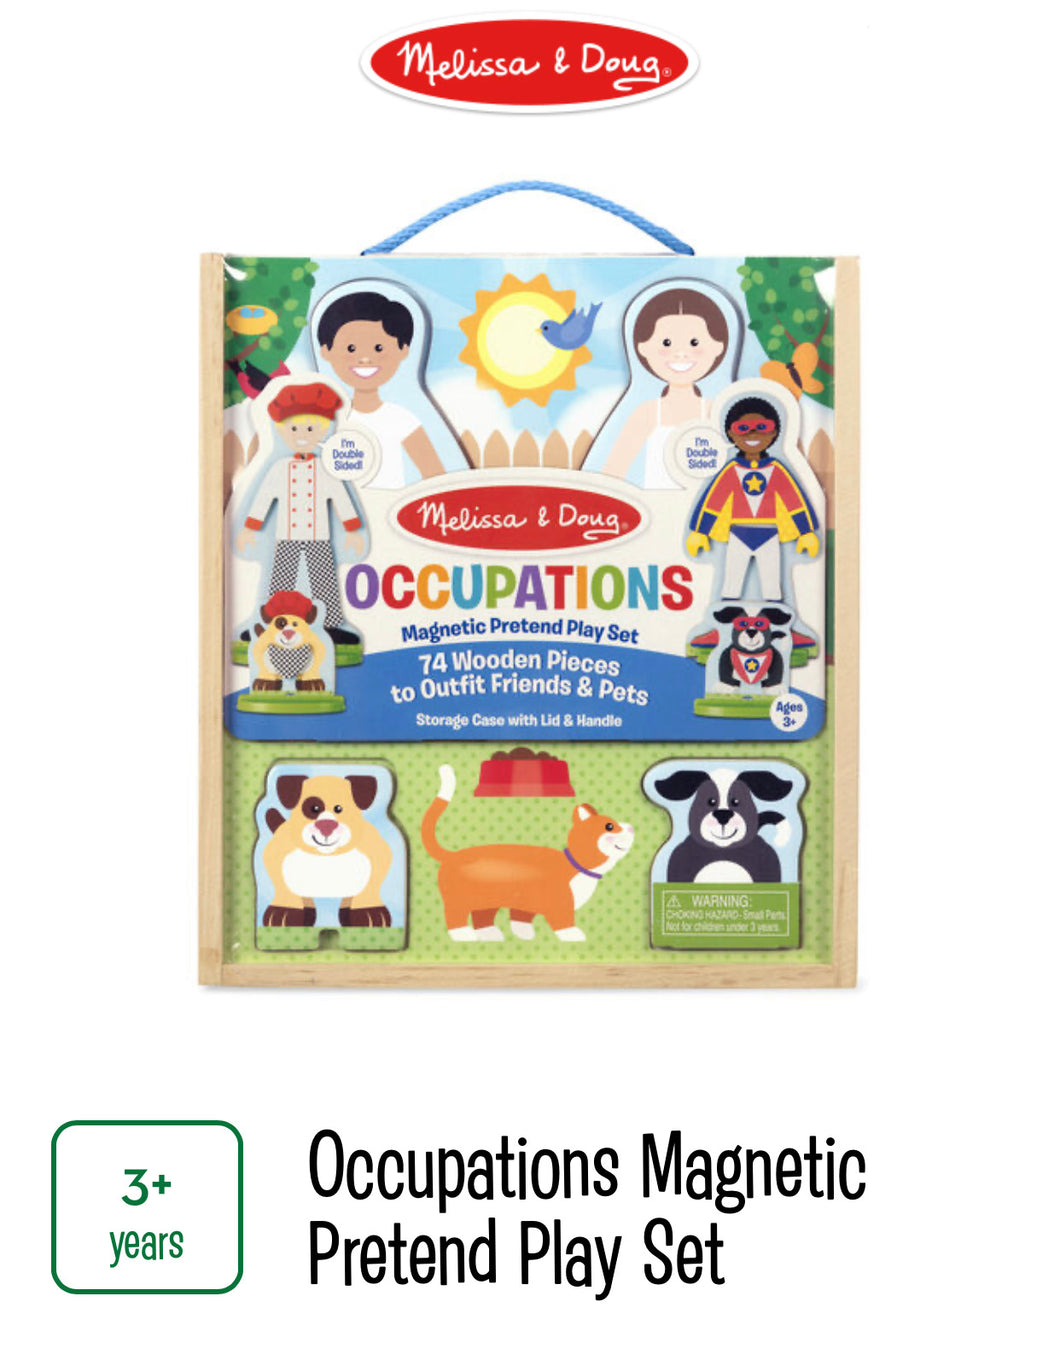 Occupations Magnetic Pretend Play